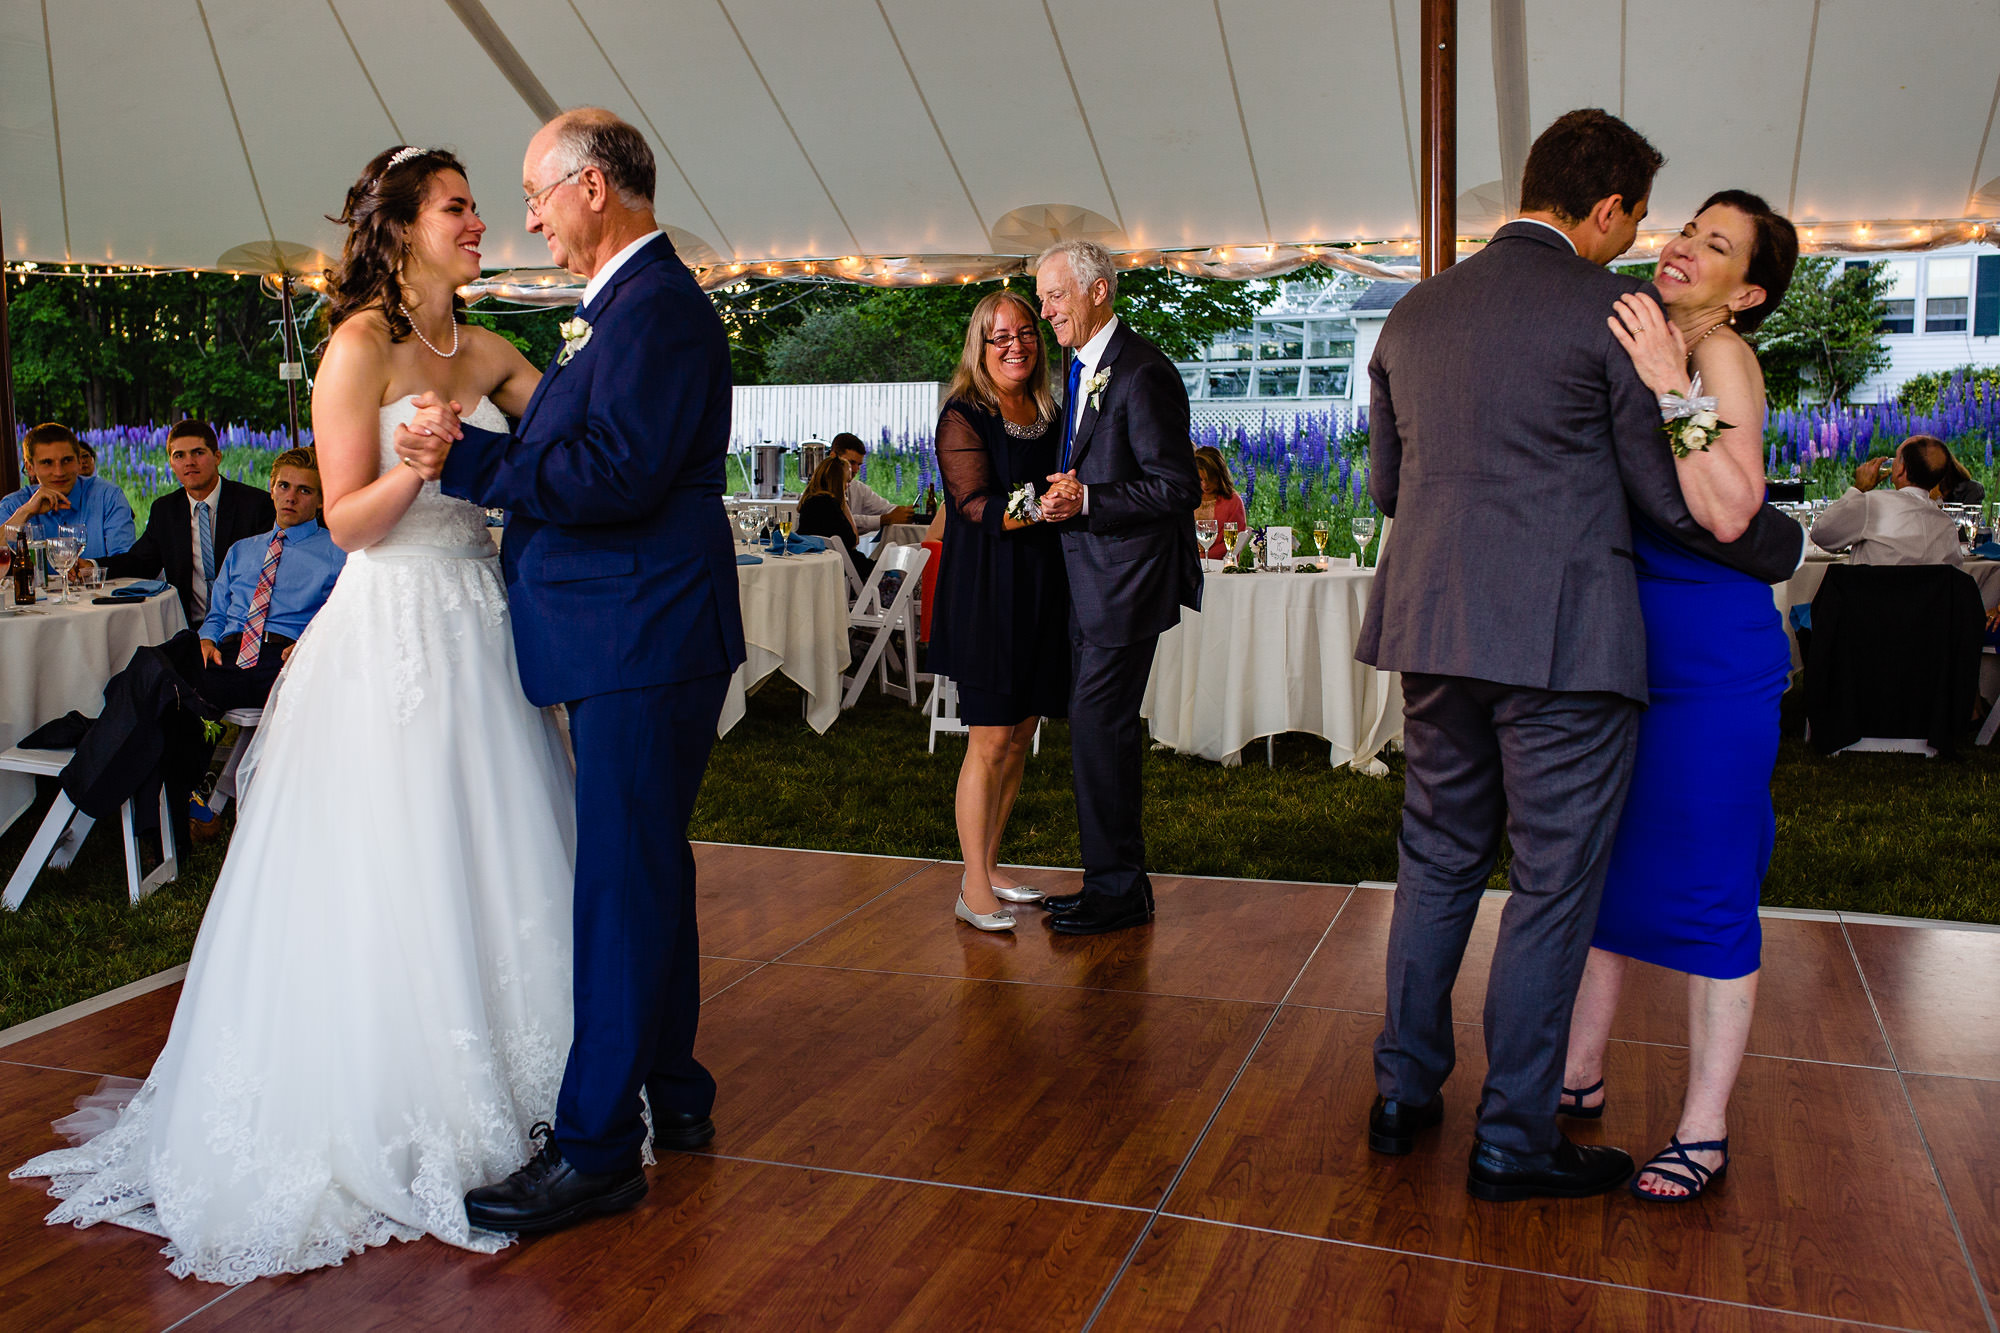 The bride, groom, and their parents share a dance at their Maine island wedding.